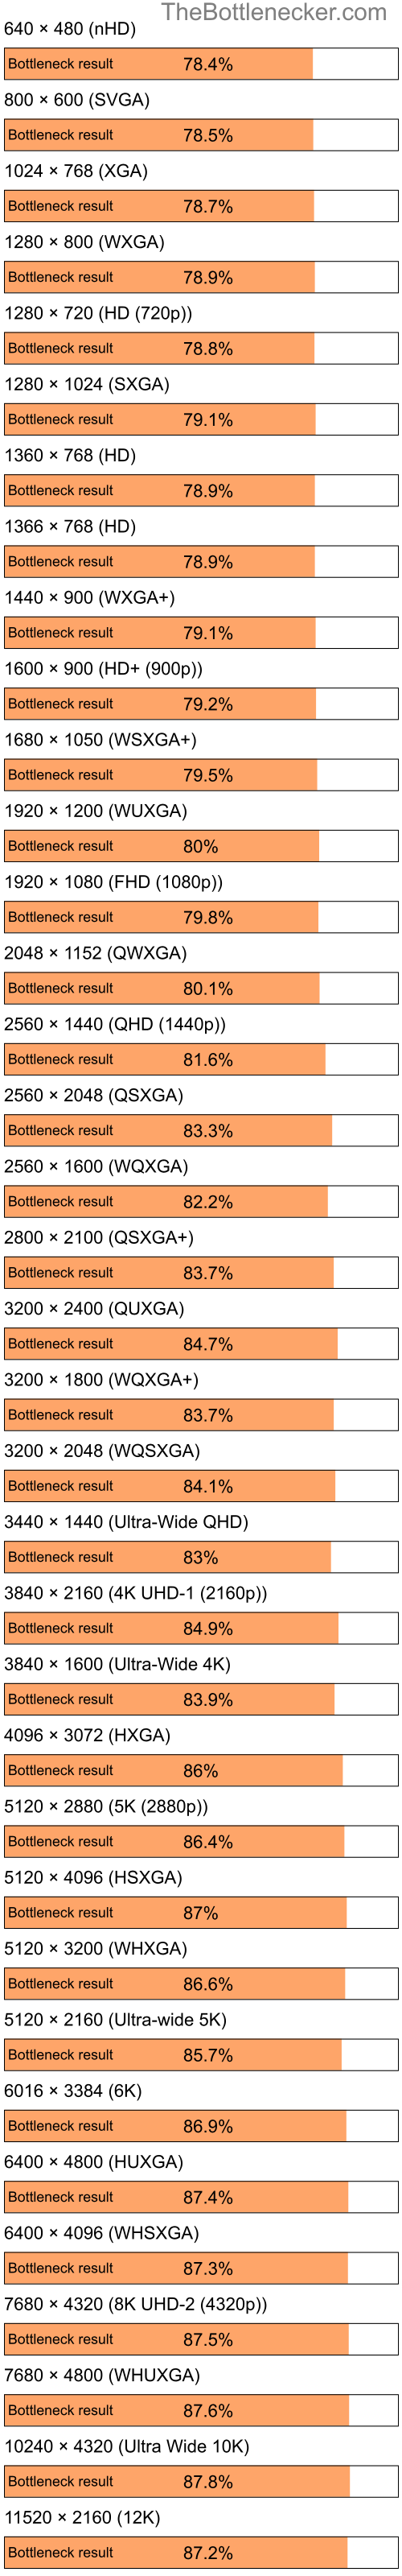 Bottleneck results by resolution for Intel Pentium 4 and AMD Mobility Radeon 9600 in Graphic Card Intense Tasks